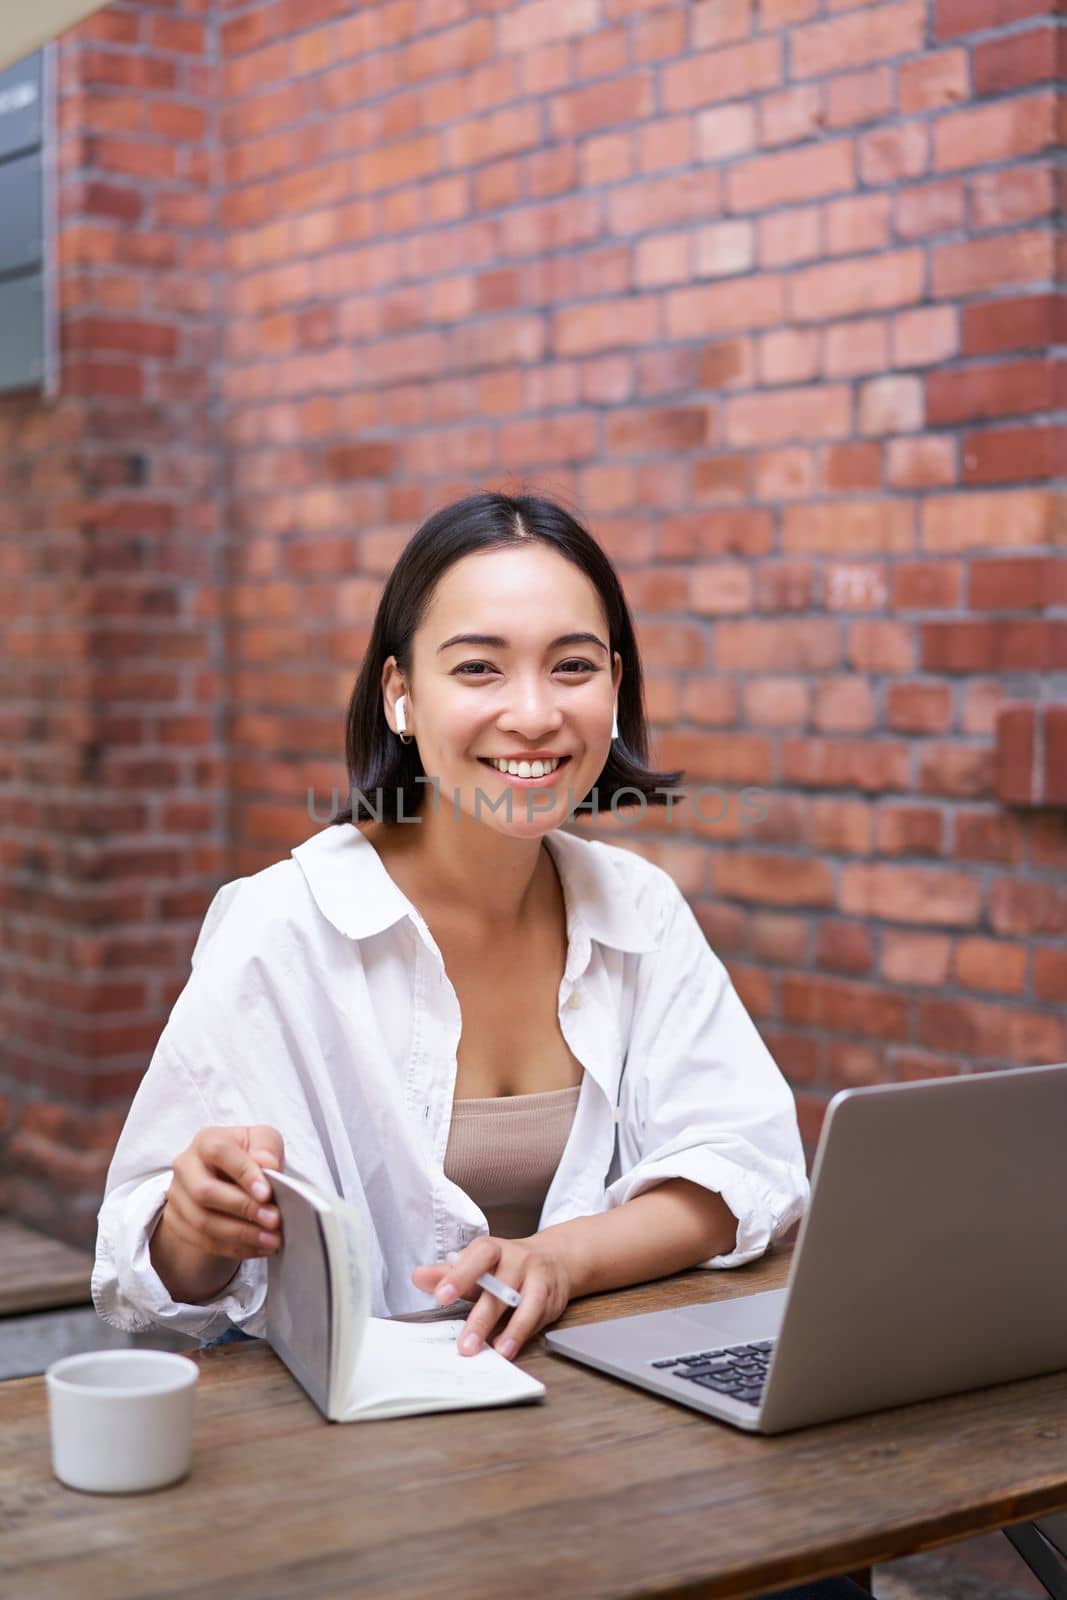 Stylish asian girl works in coworking with laptop, makes notes, uses wireless earphones and smiles, sits near brick wall in office.